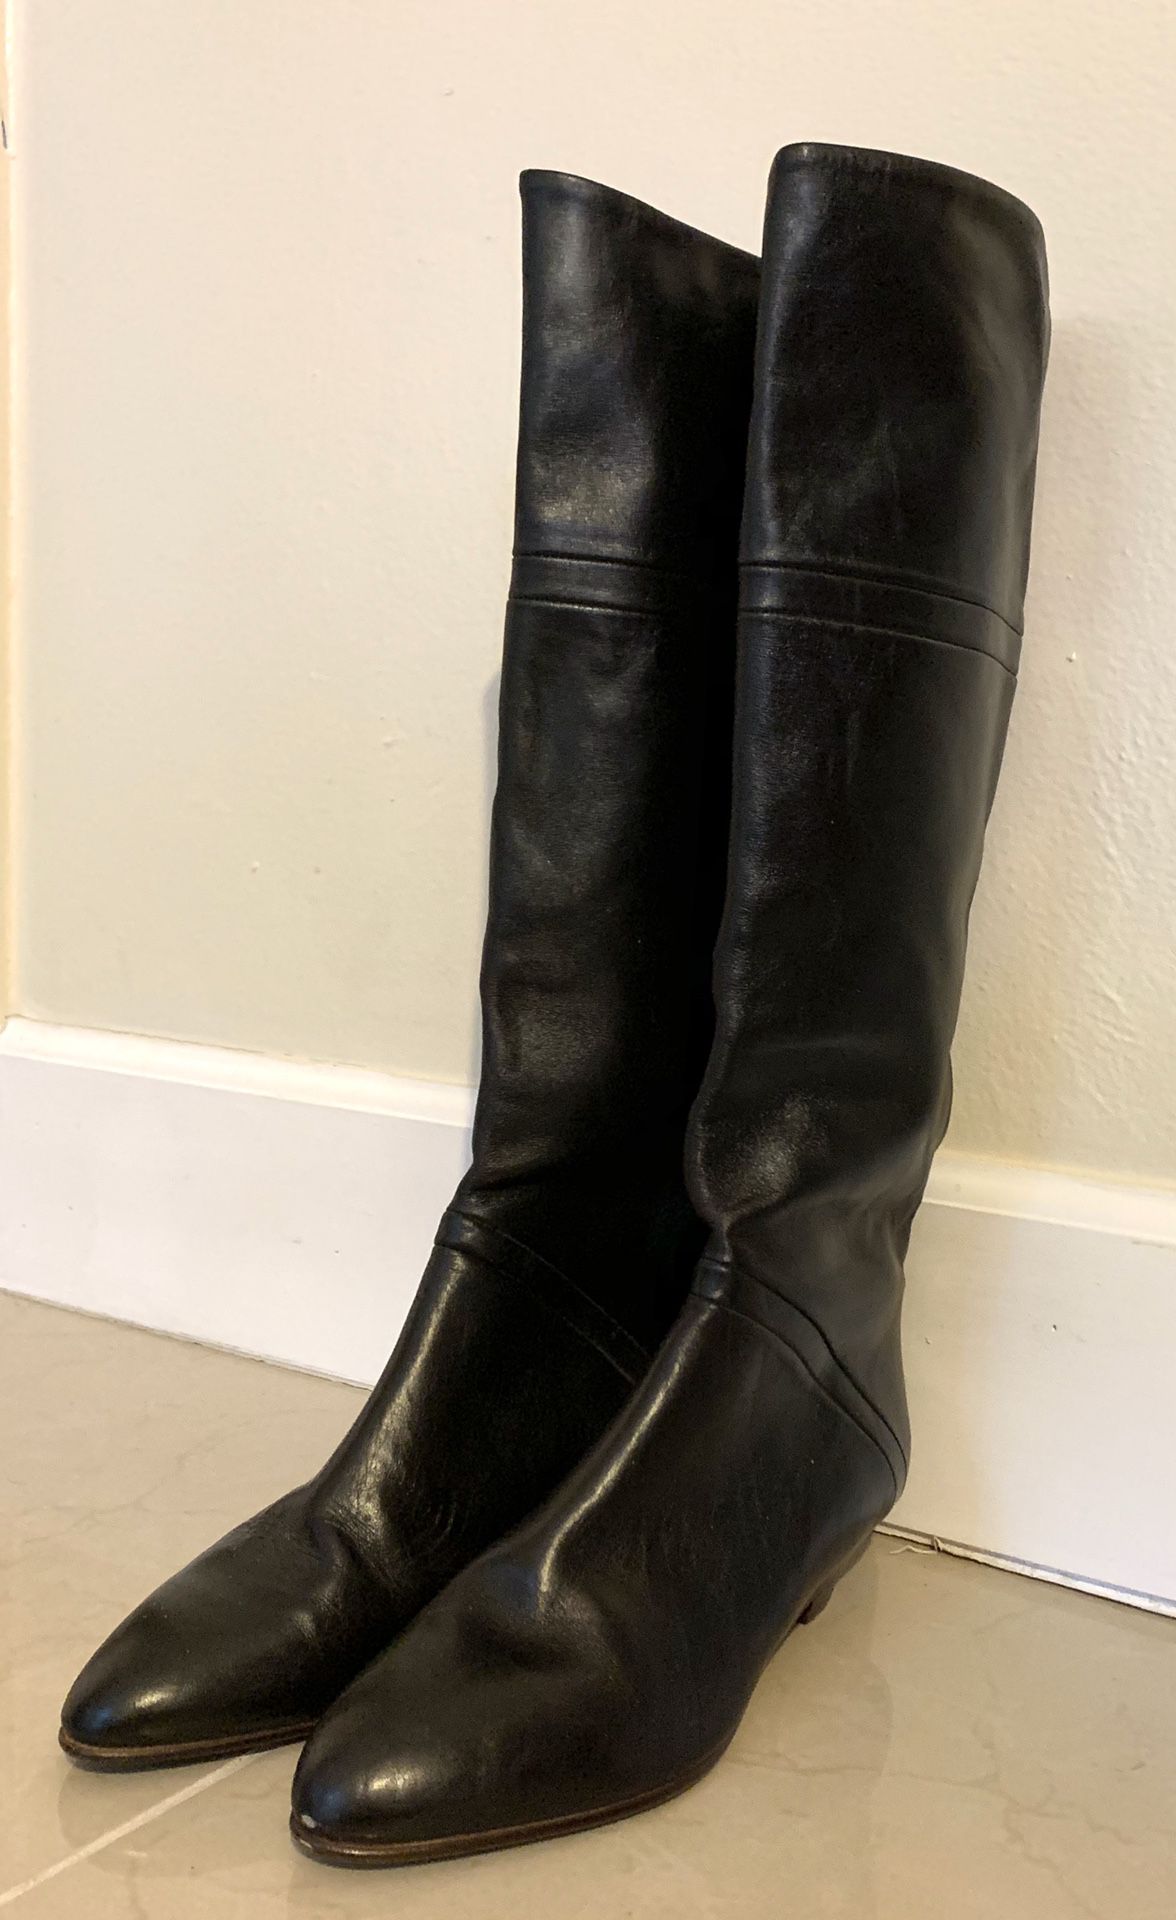 Black leather boots - made in Italy 🇮🇹 size 7 1/2